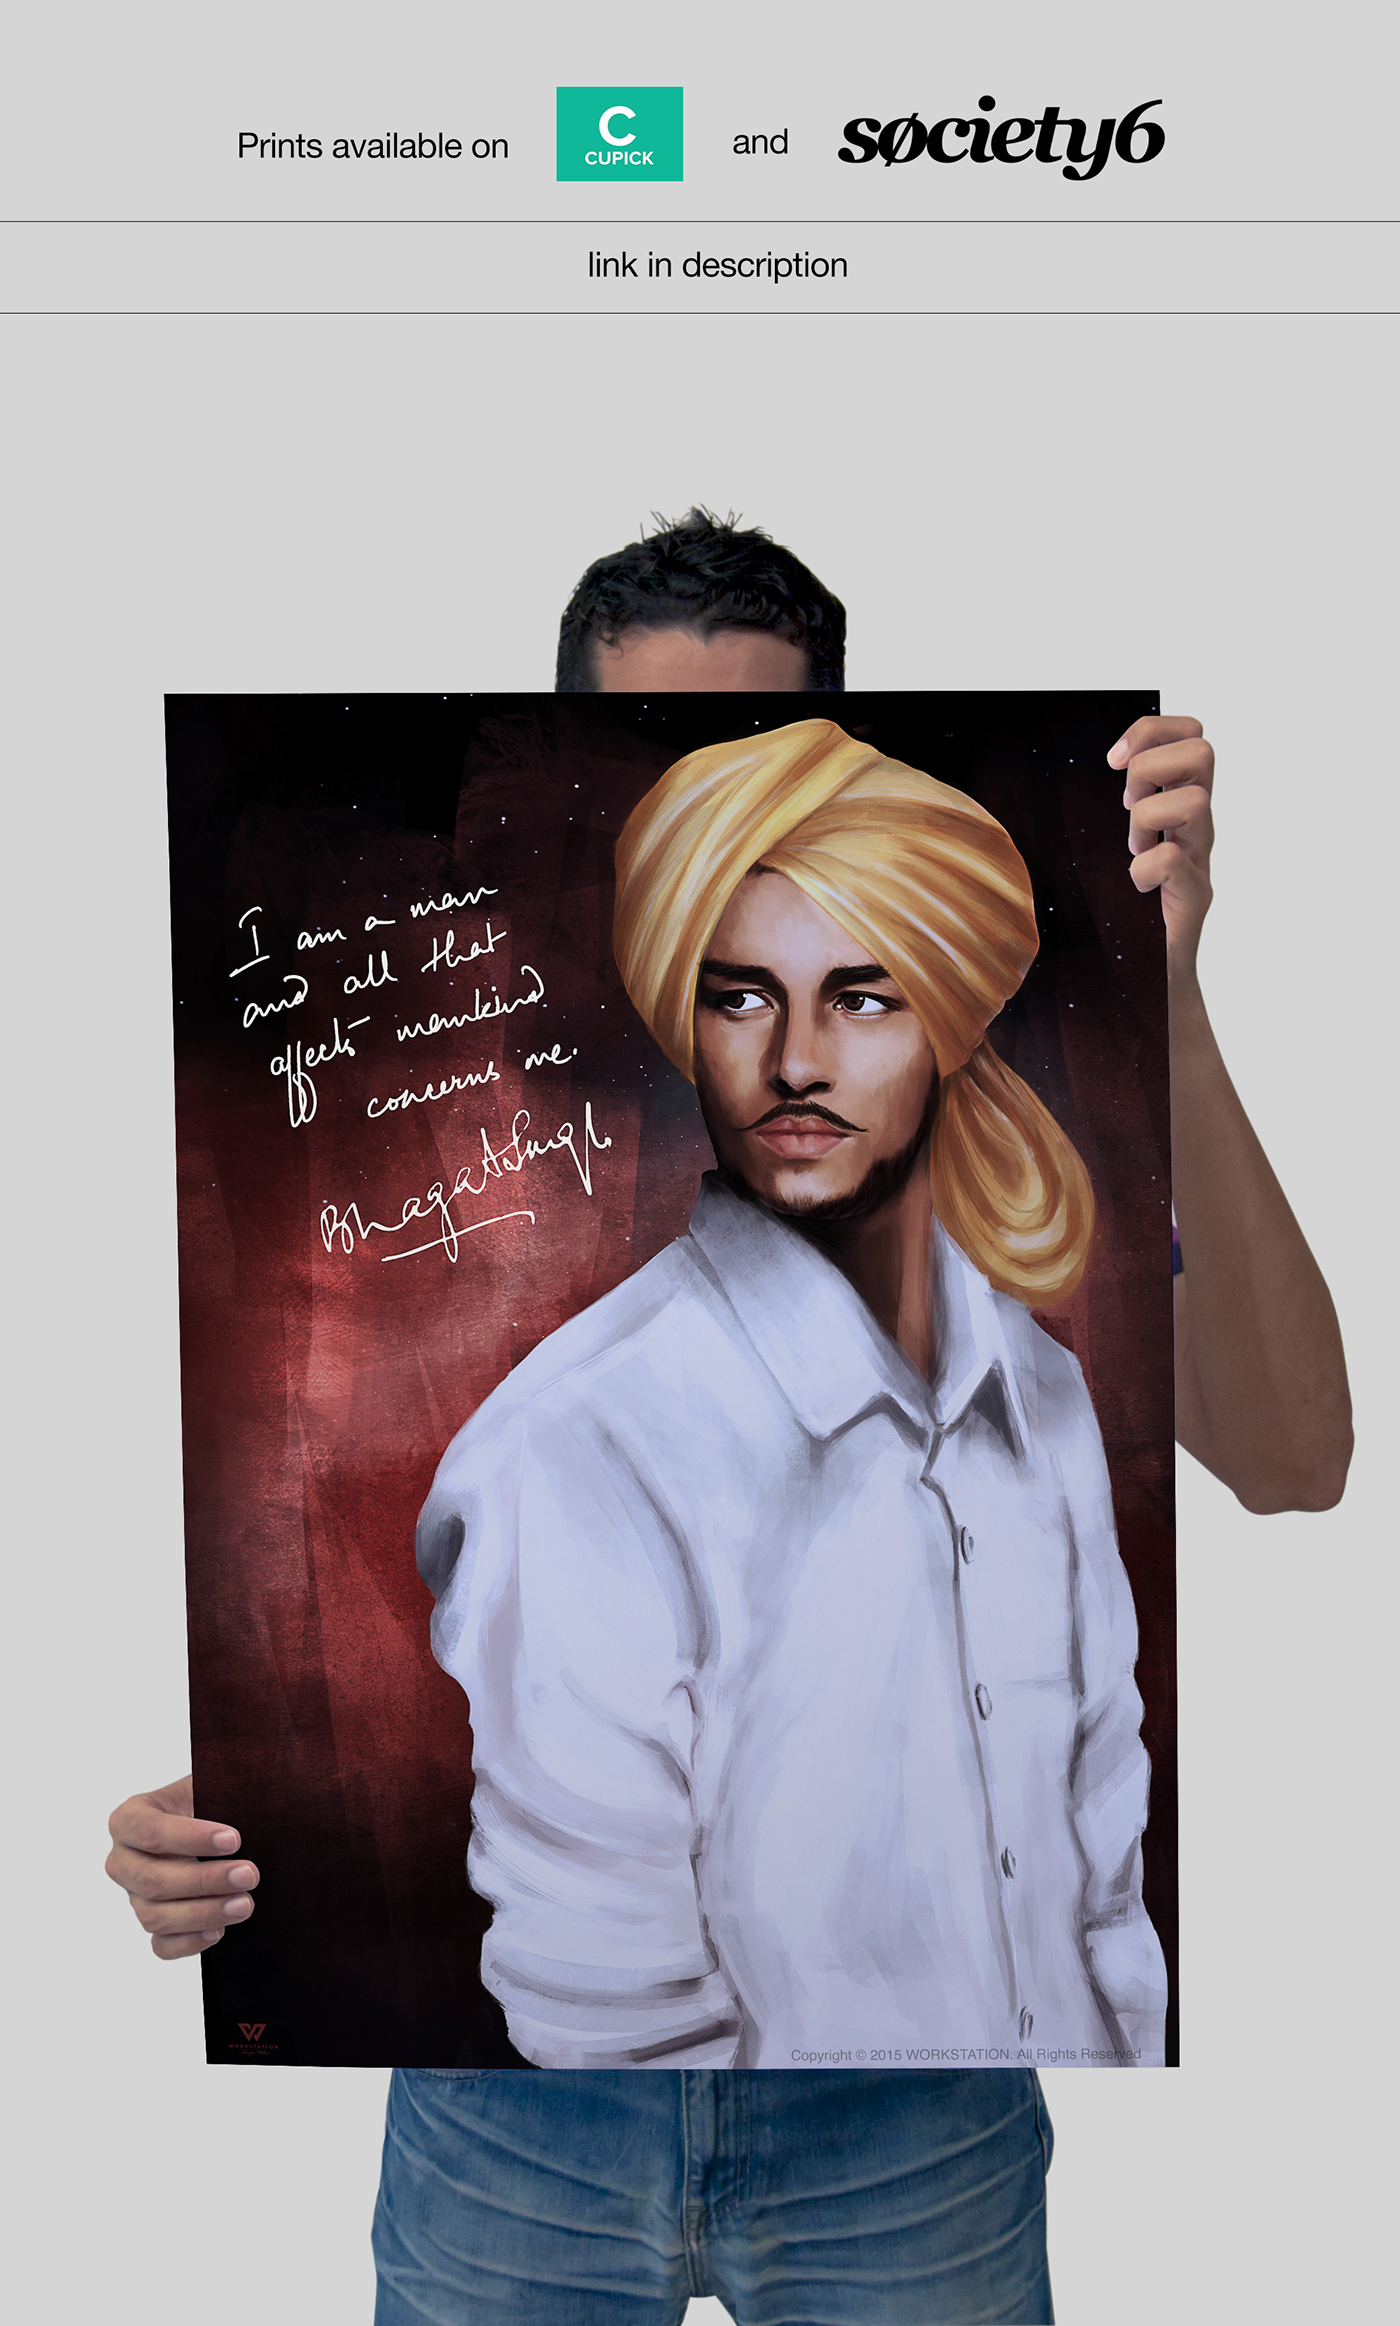 bhagat singh poster India Independence Day freedom design digital paiinting